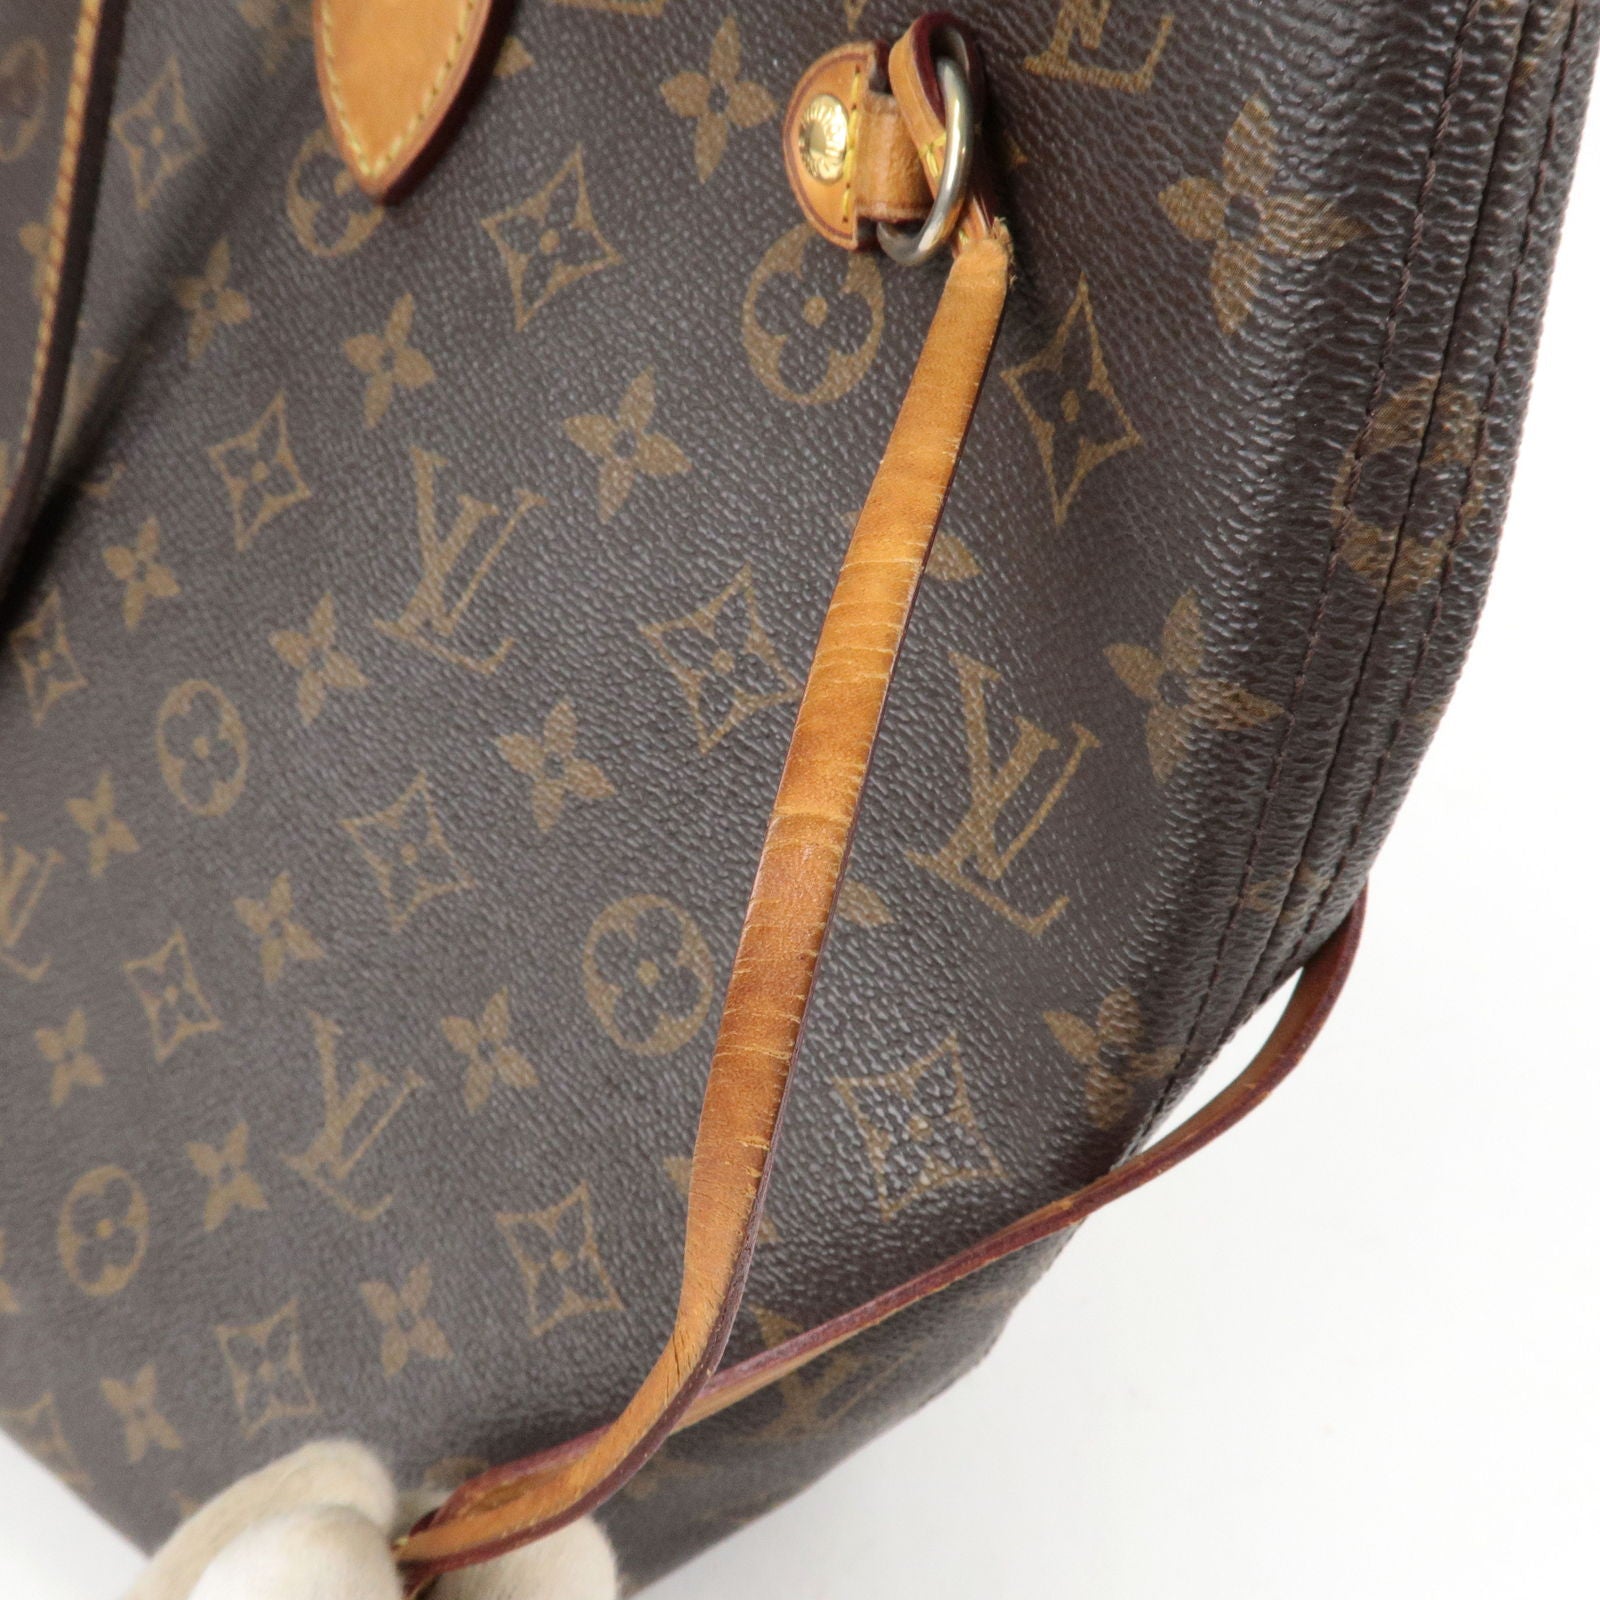 Louis-Vuitton-Monogram-Neverfull-MM-Tote-Bag-M40156 – dct-ep_vintage luxury  Store